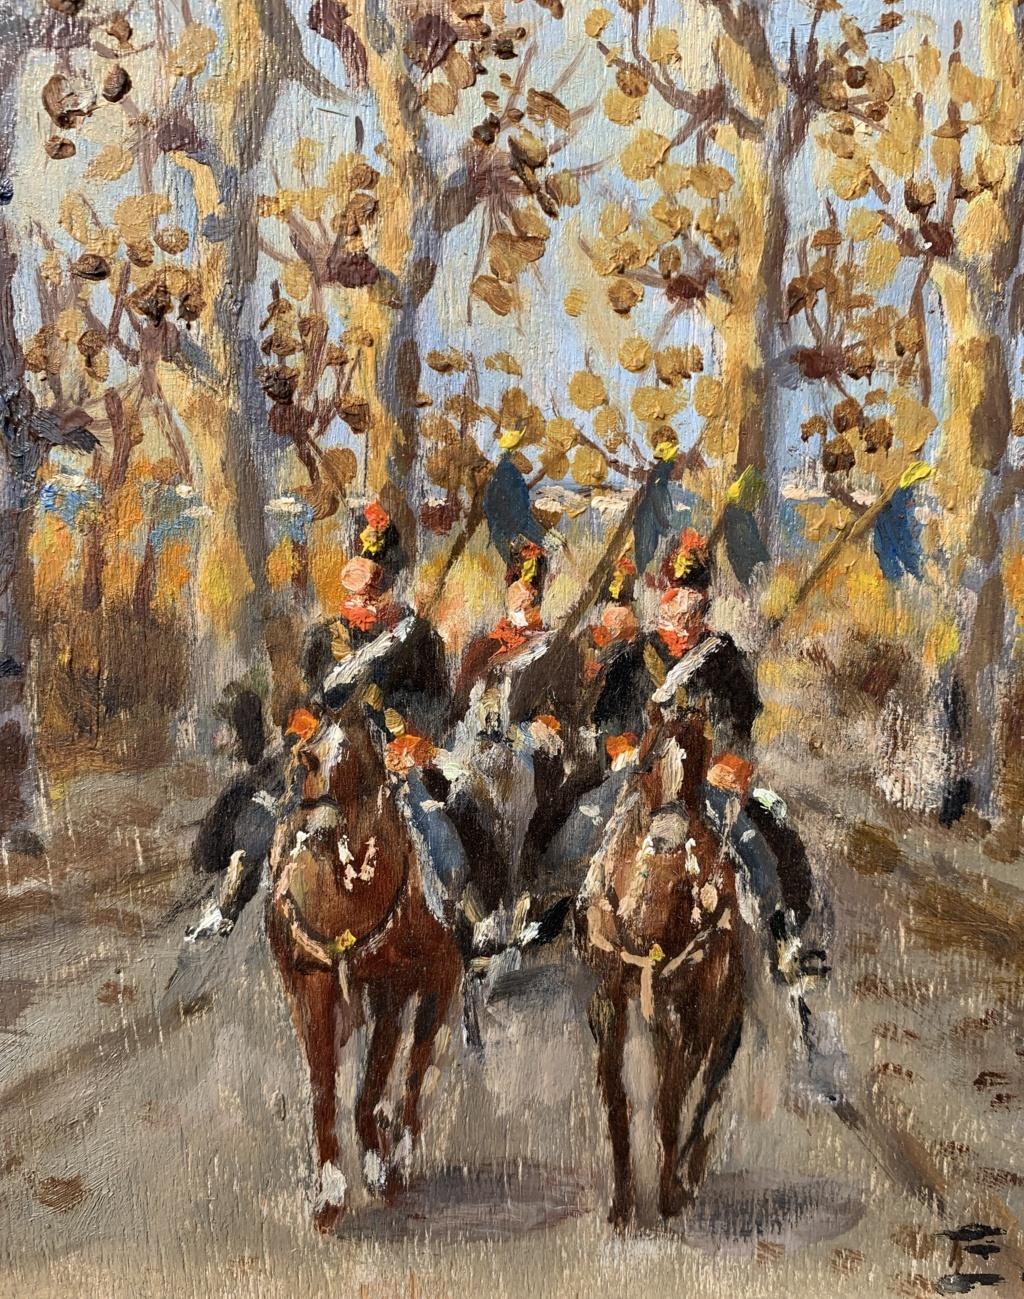 Enrico Vizzotto Alberti (Oderzo 1880 - Padua 1976) - The 7th regiment of Milan lancers.

25.5 x 35 cm without frame, 51.5 x 57 cm with frame.

Ancient oil painting on wood, within a passe-partout in a wooden frame.

Work signed bottom right: 